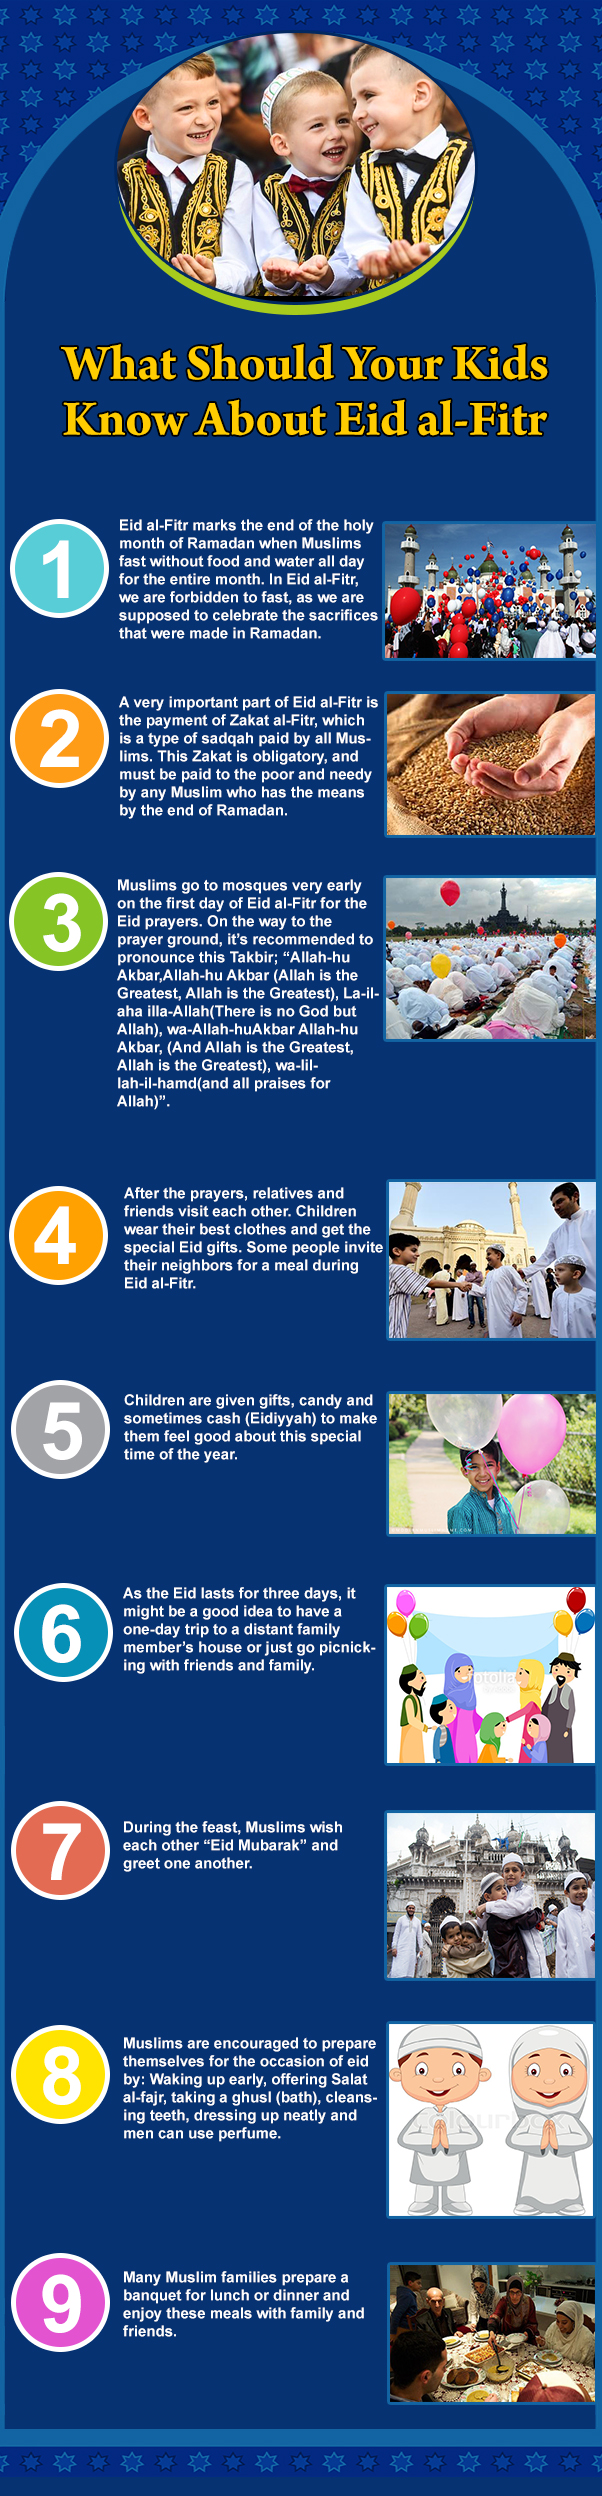 What Should Your Kids Know About Eid al-Fitr